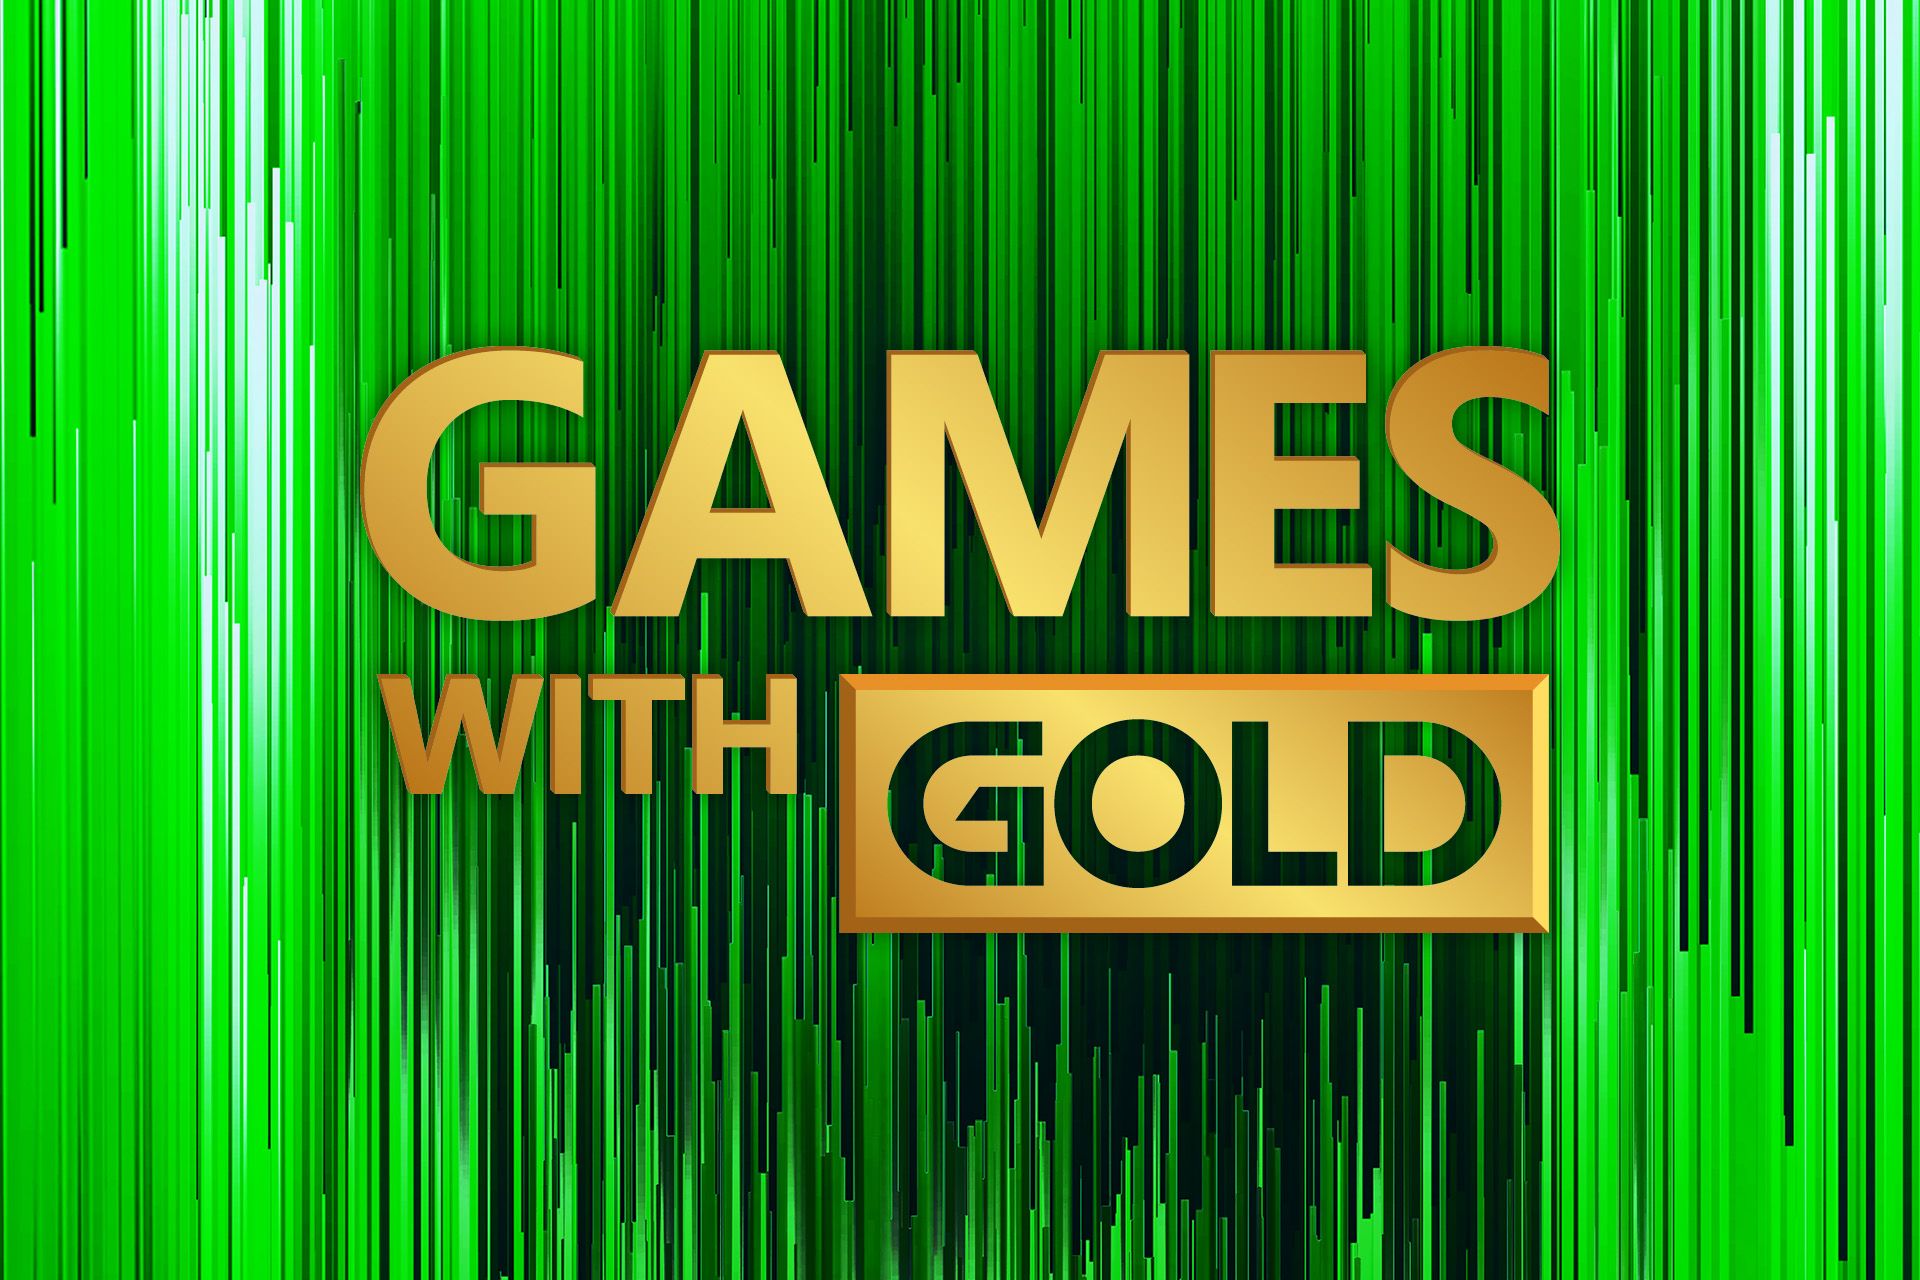 Xbox’s Games with Gold logo on a green background